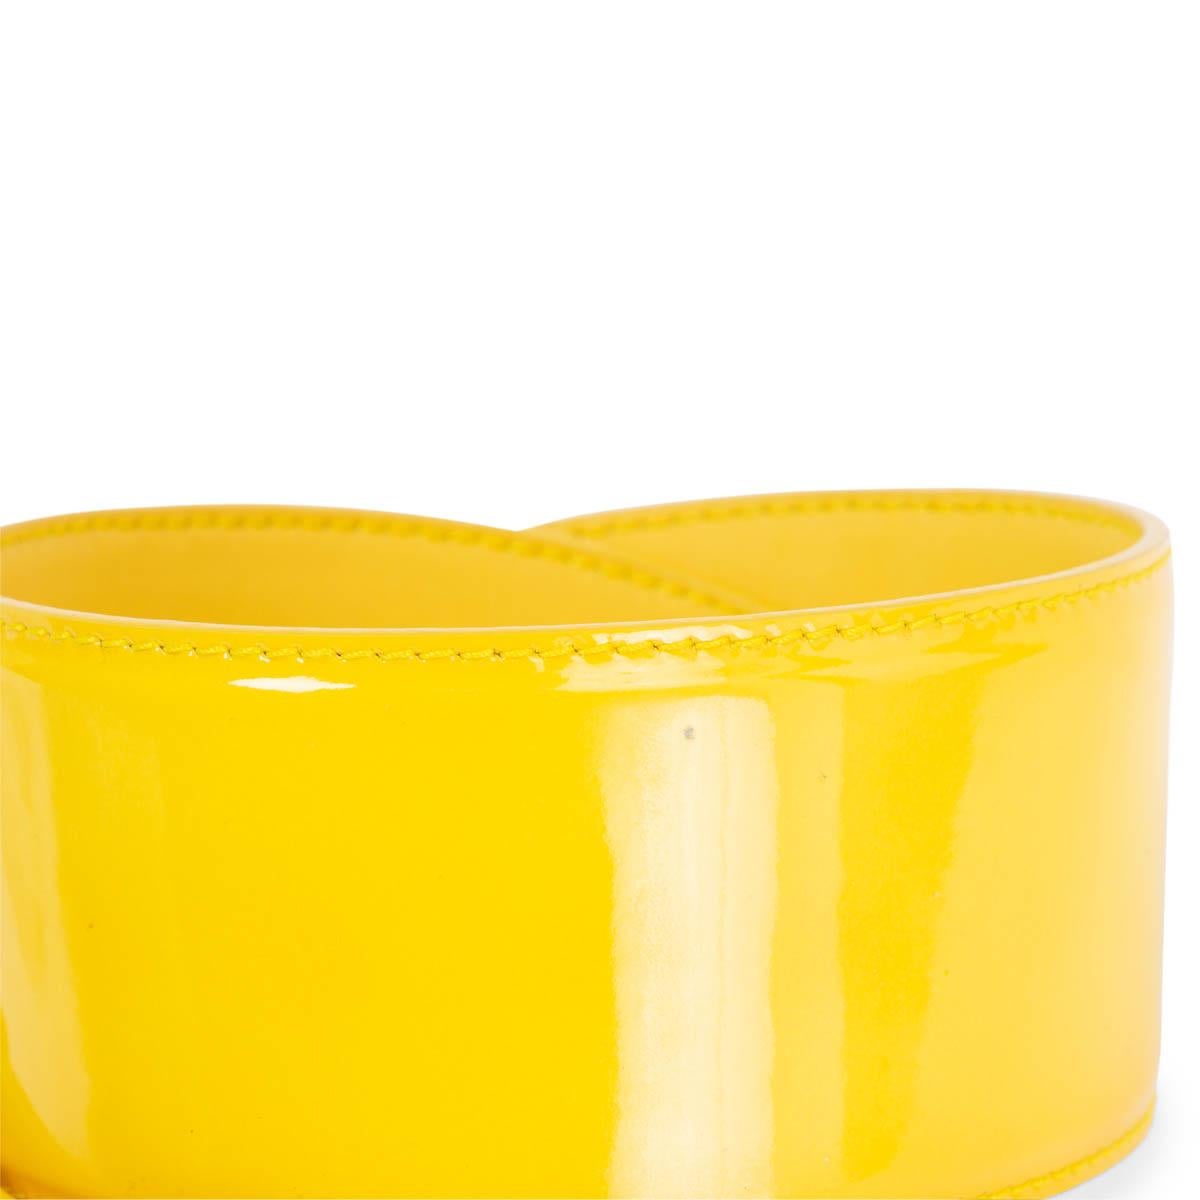 MIU MIU yellow patent leather WIDE WAIST Belt 70 In Fair Condition For Sale In Zürich, CH